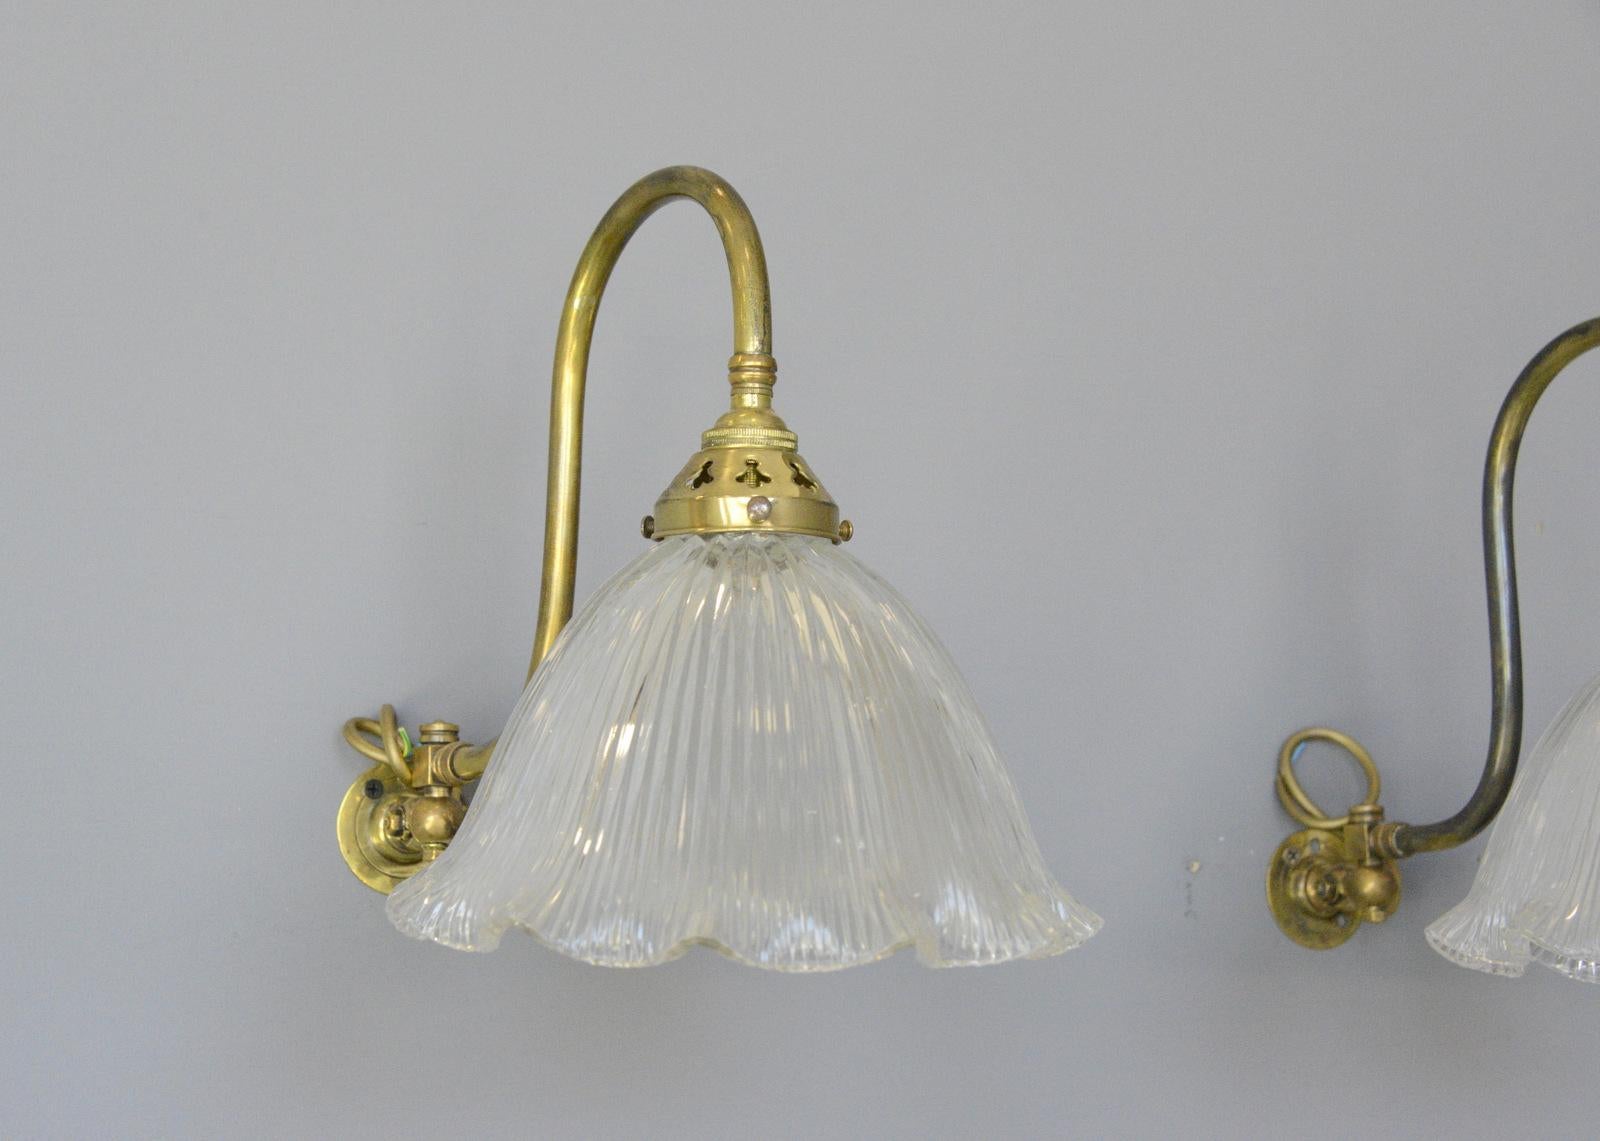 Articulated wall sconces by Holophane, circa 1910

- Price is per light (3 available)
- Articulated curved brass arms
- Fluted prismatic shades
- Takes B22 fitting bulbs
- Wires directly into a wall feed
- English, 1910
- Measures: 24cm wide